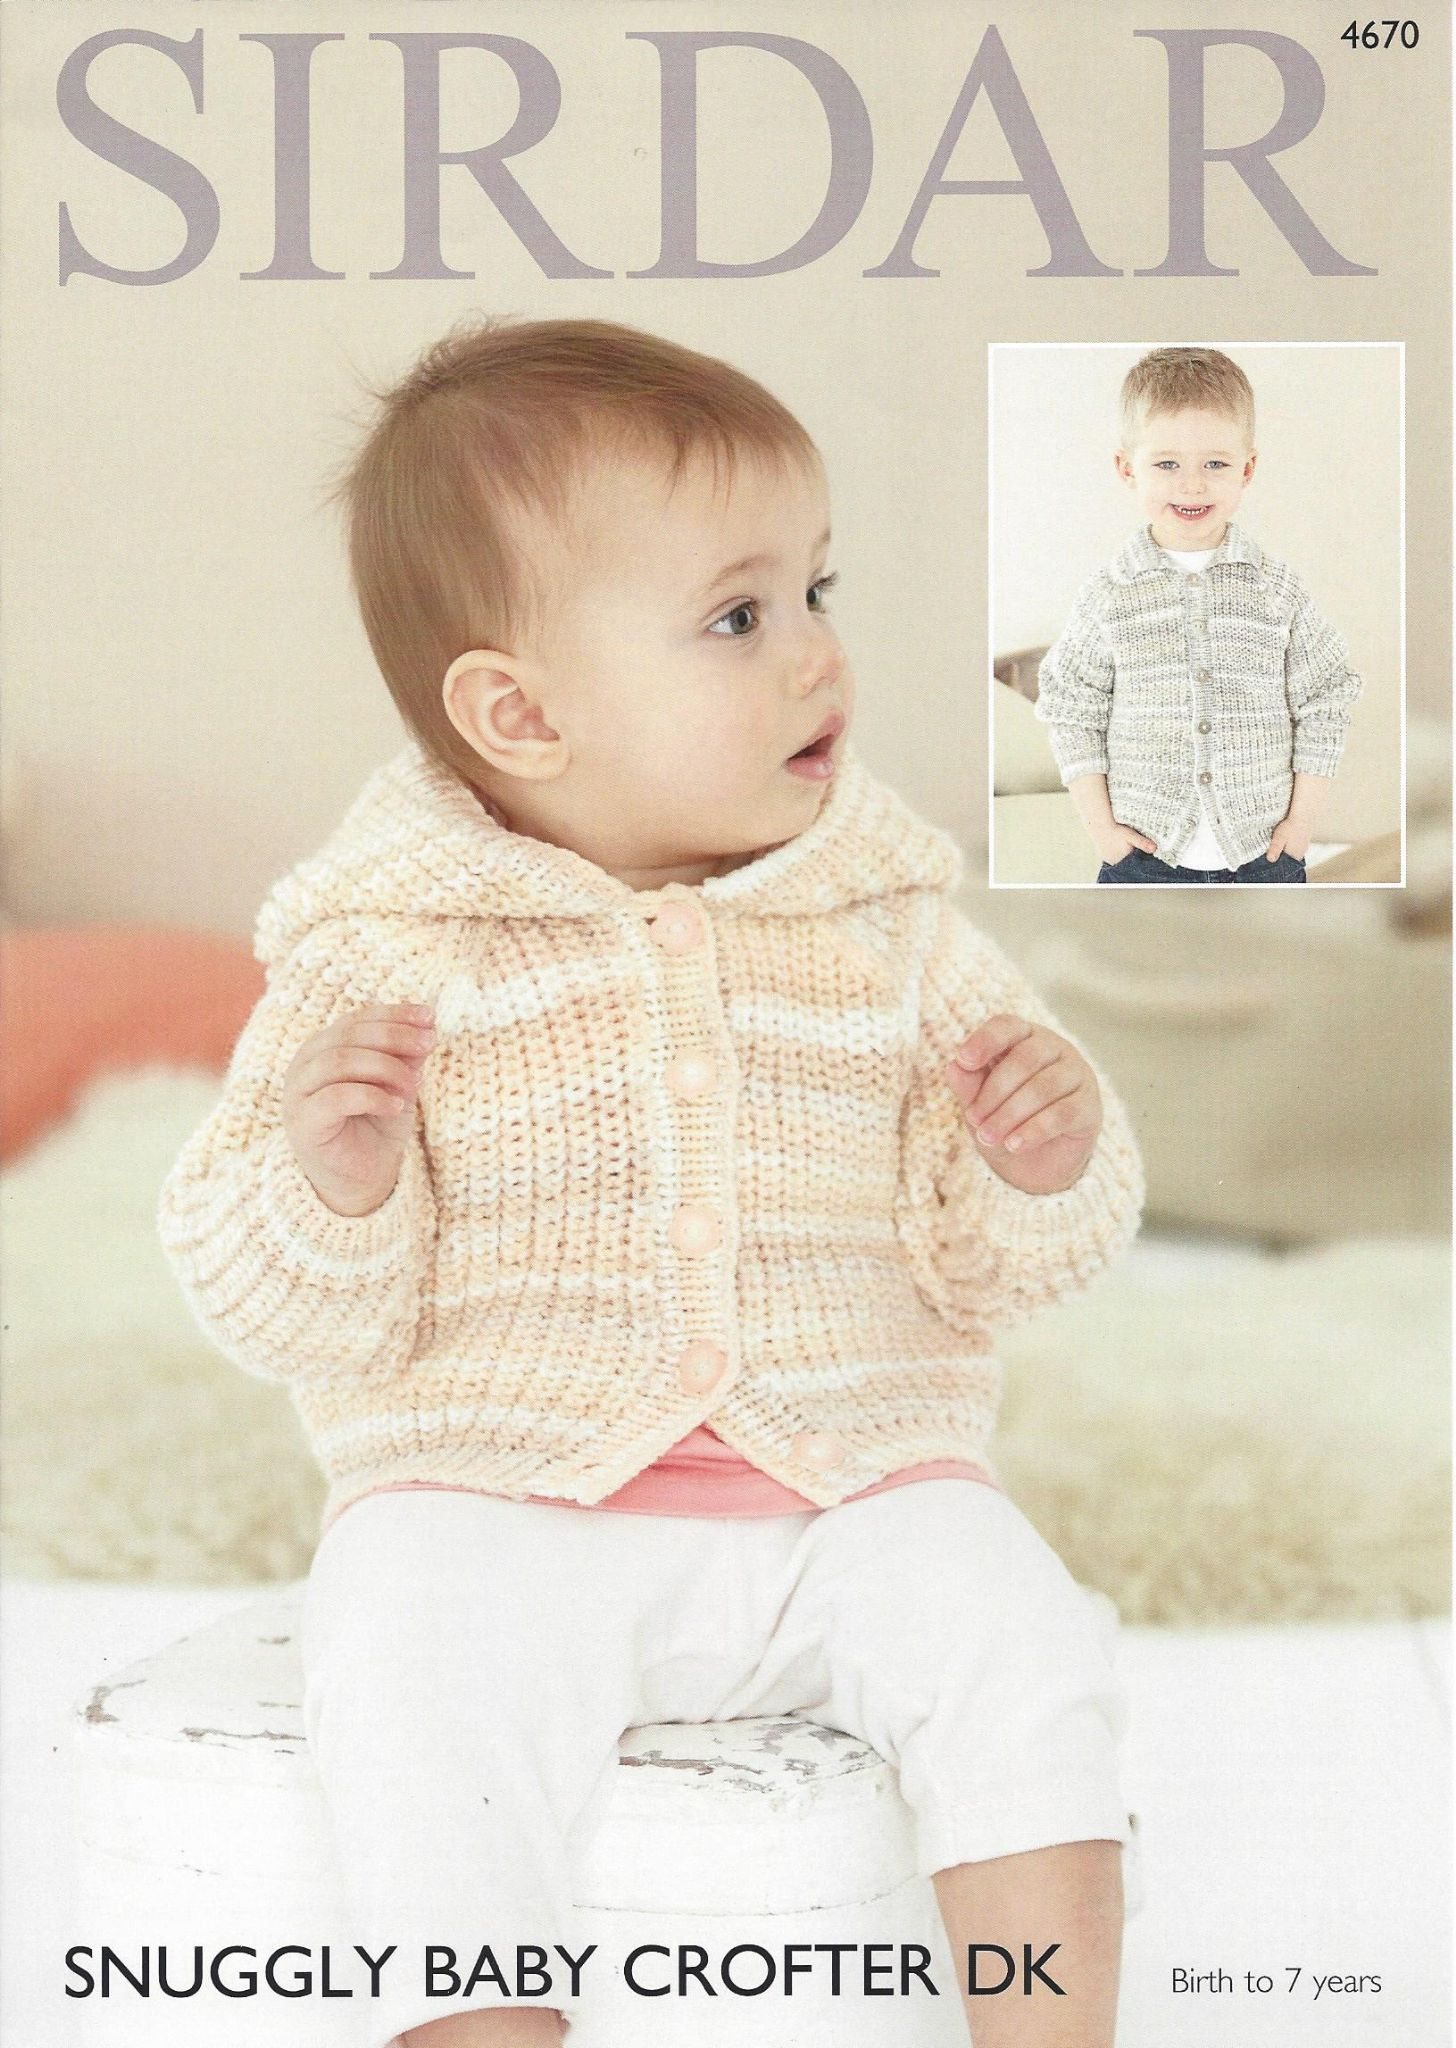 Sirdar Baby Knitting Patterns 4670 Sirdar Snuggly Ba Crofter Dk Jacket Knitting Pattern To Fit Birth To 7 Years